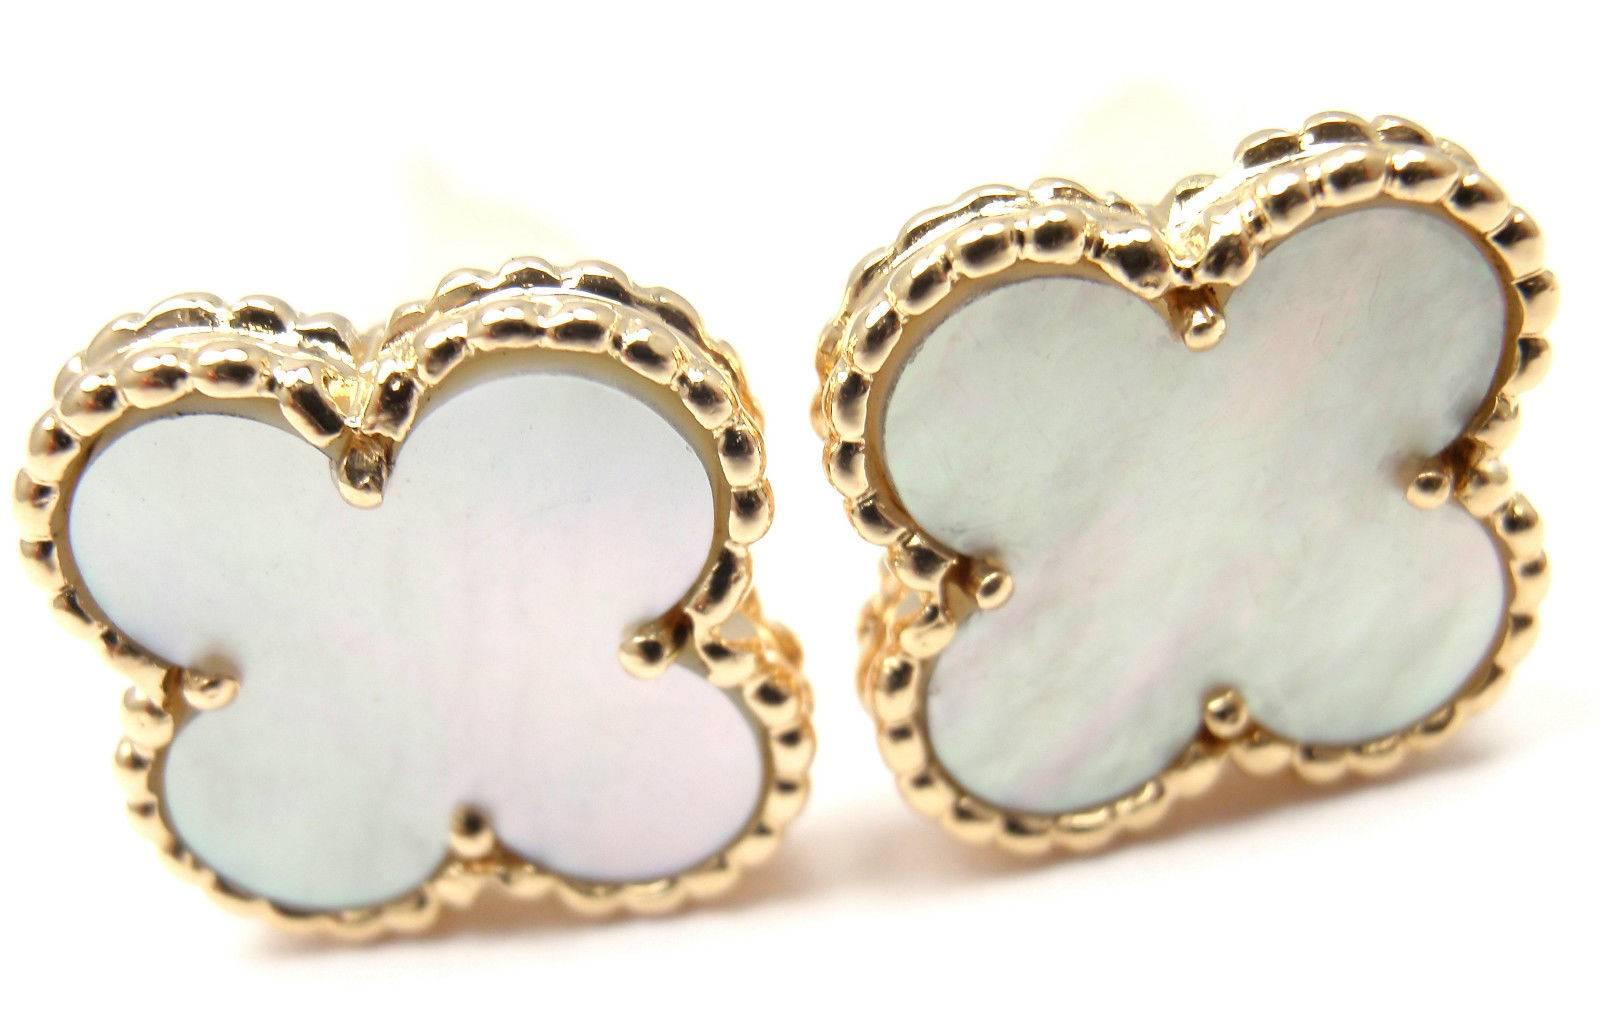 18k Yellow Gold Mother of Pearl Earrings by Van Cleef & Arpels. 
Part of VCA's Glorious 